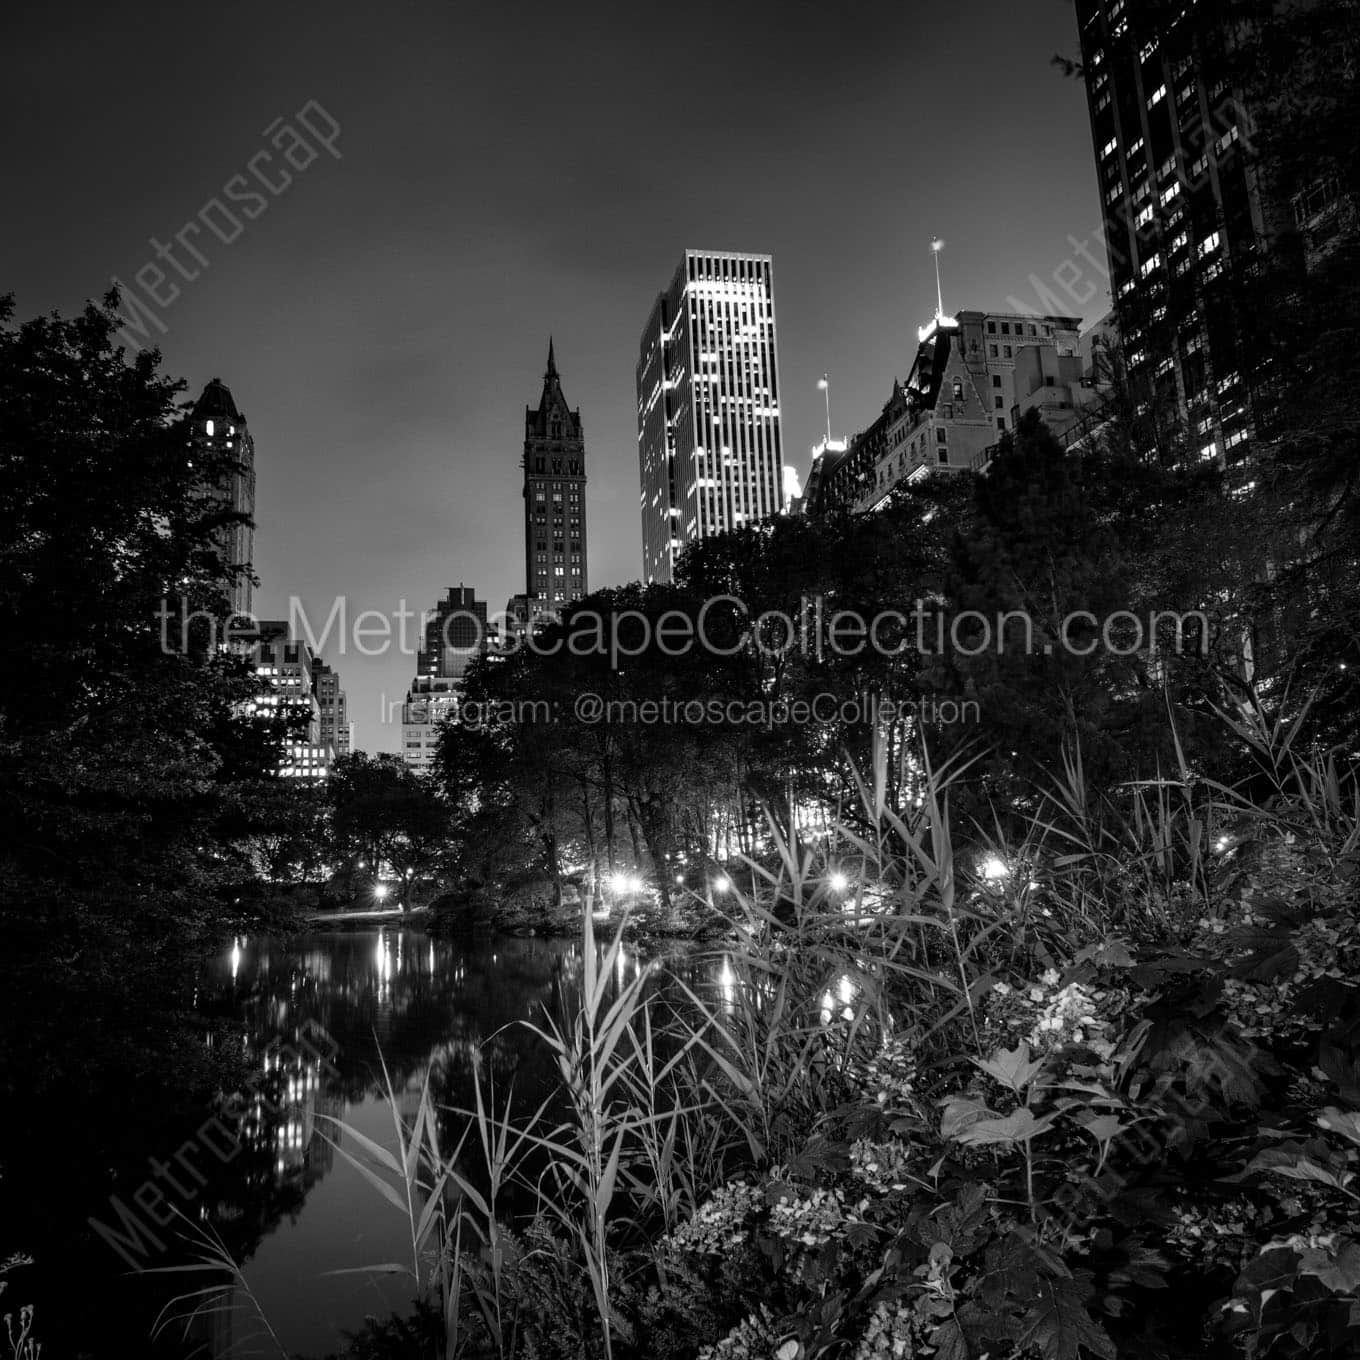 central park pond at night Black & White Wall Art